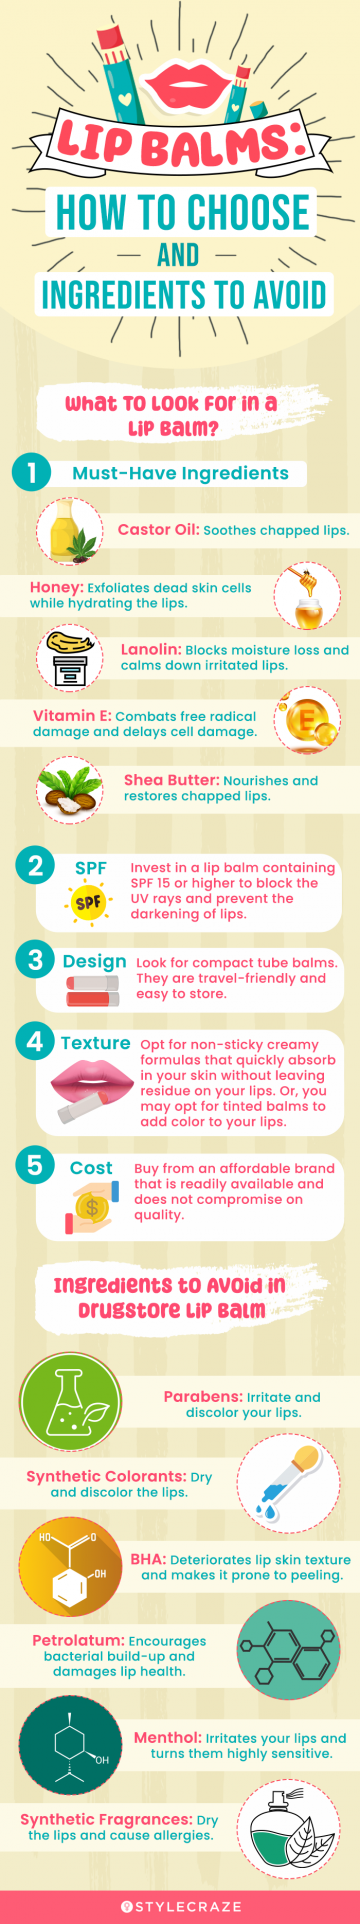 Lip Balms: How To Choose And Ingredients To Avoid